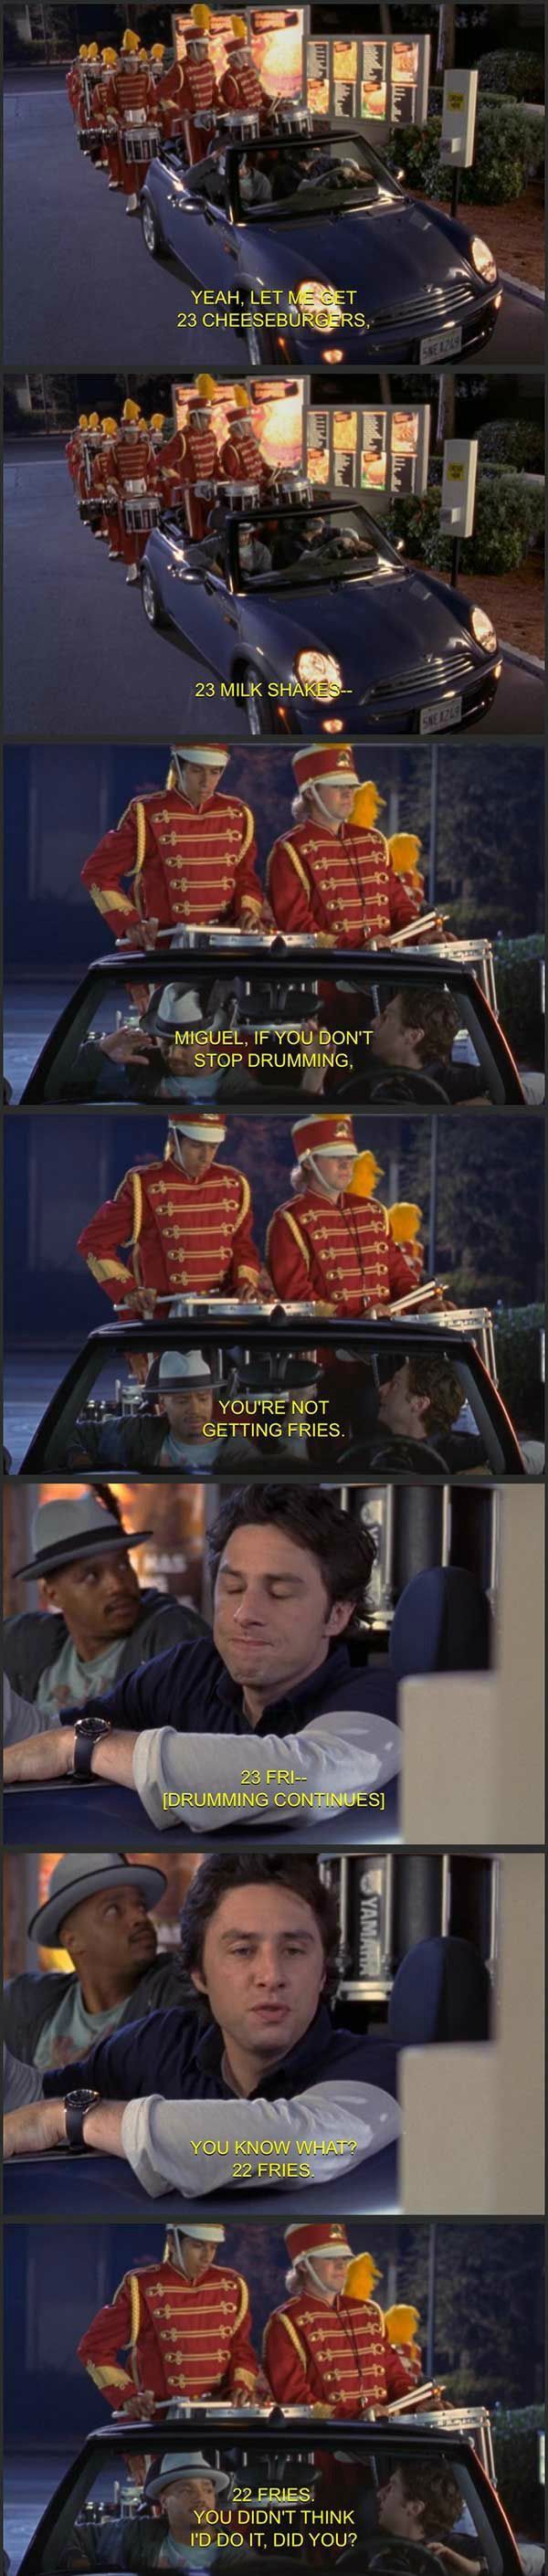 funny-pictures-23-cheeseburgers-scrubs